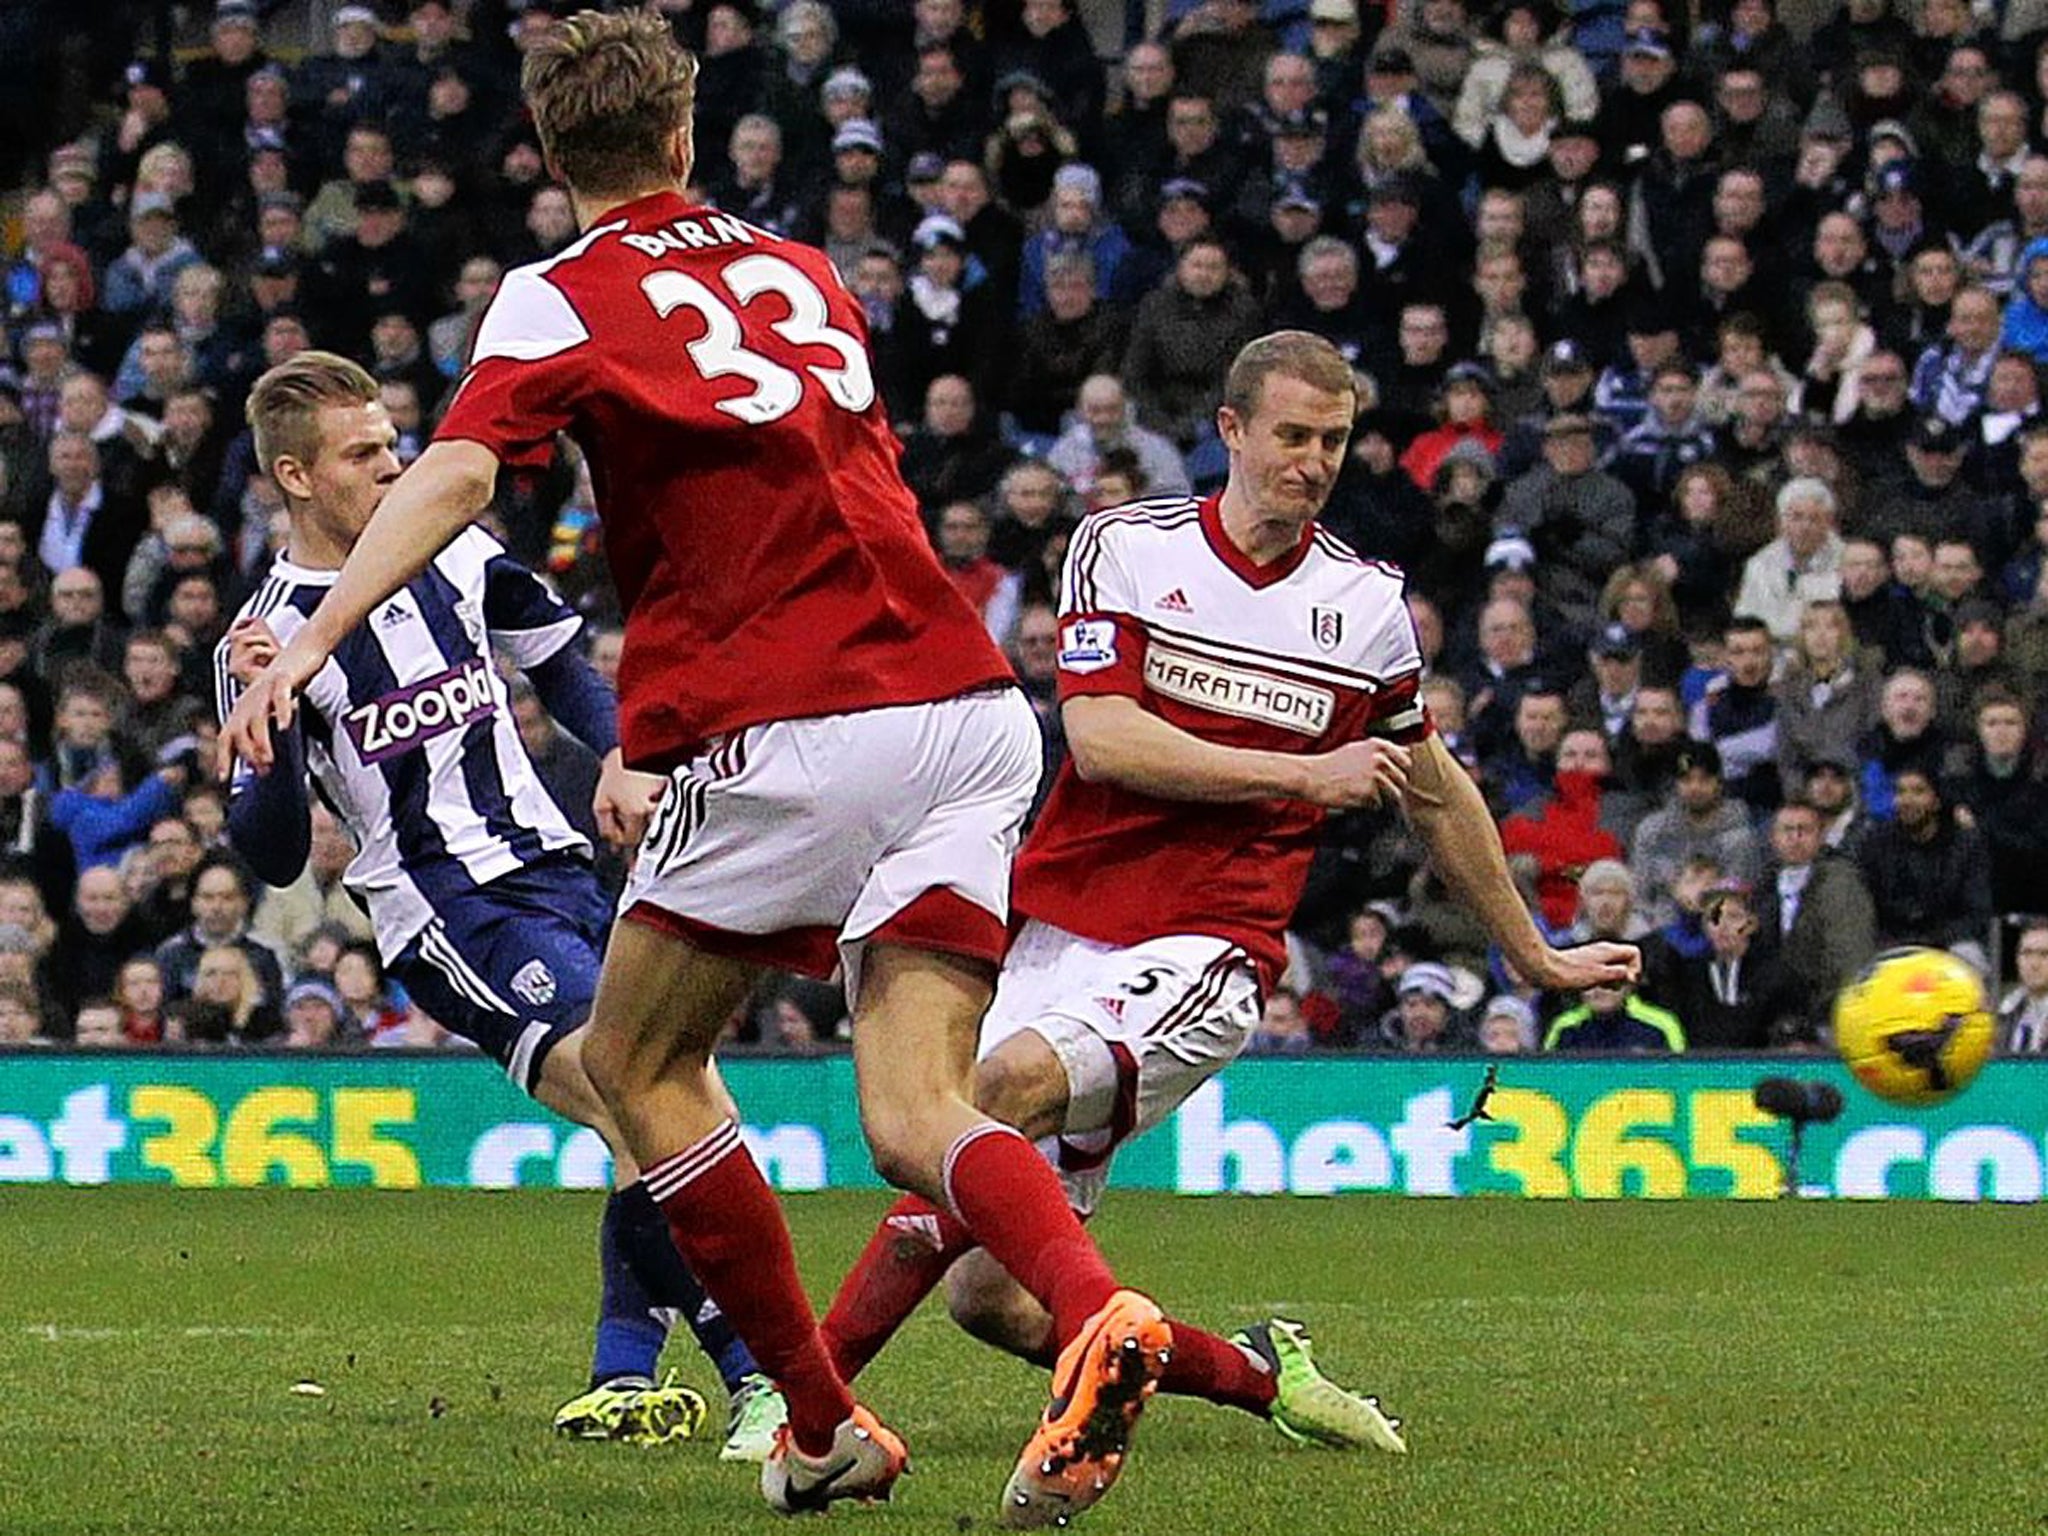 A point made: Matej Vydra delivers the shot that Maarten Stekelenburg let under his arm for West Bromwich’s late equaliser